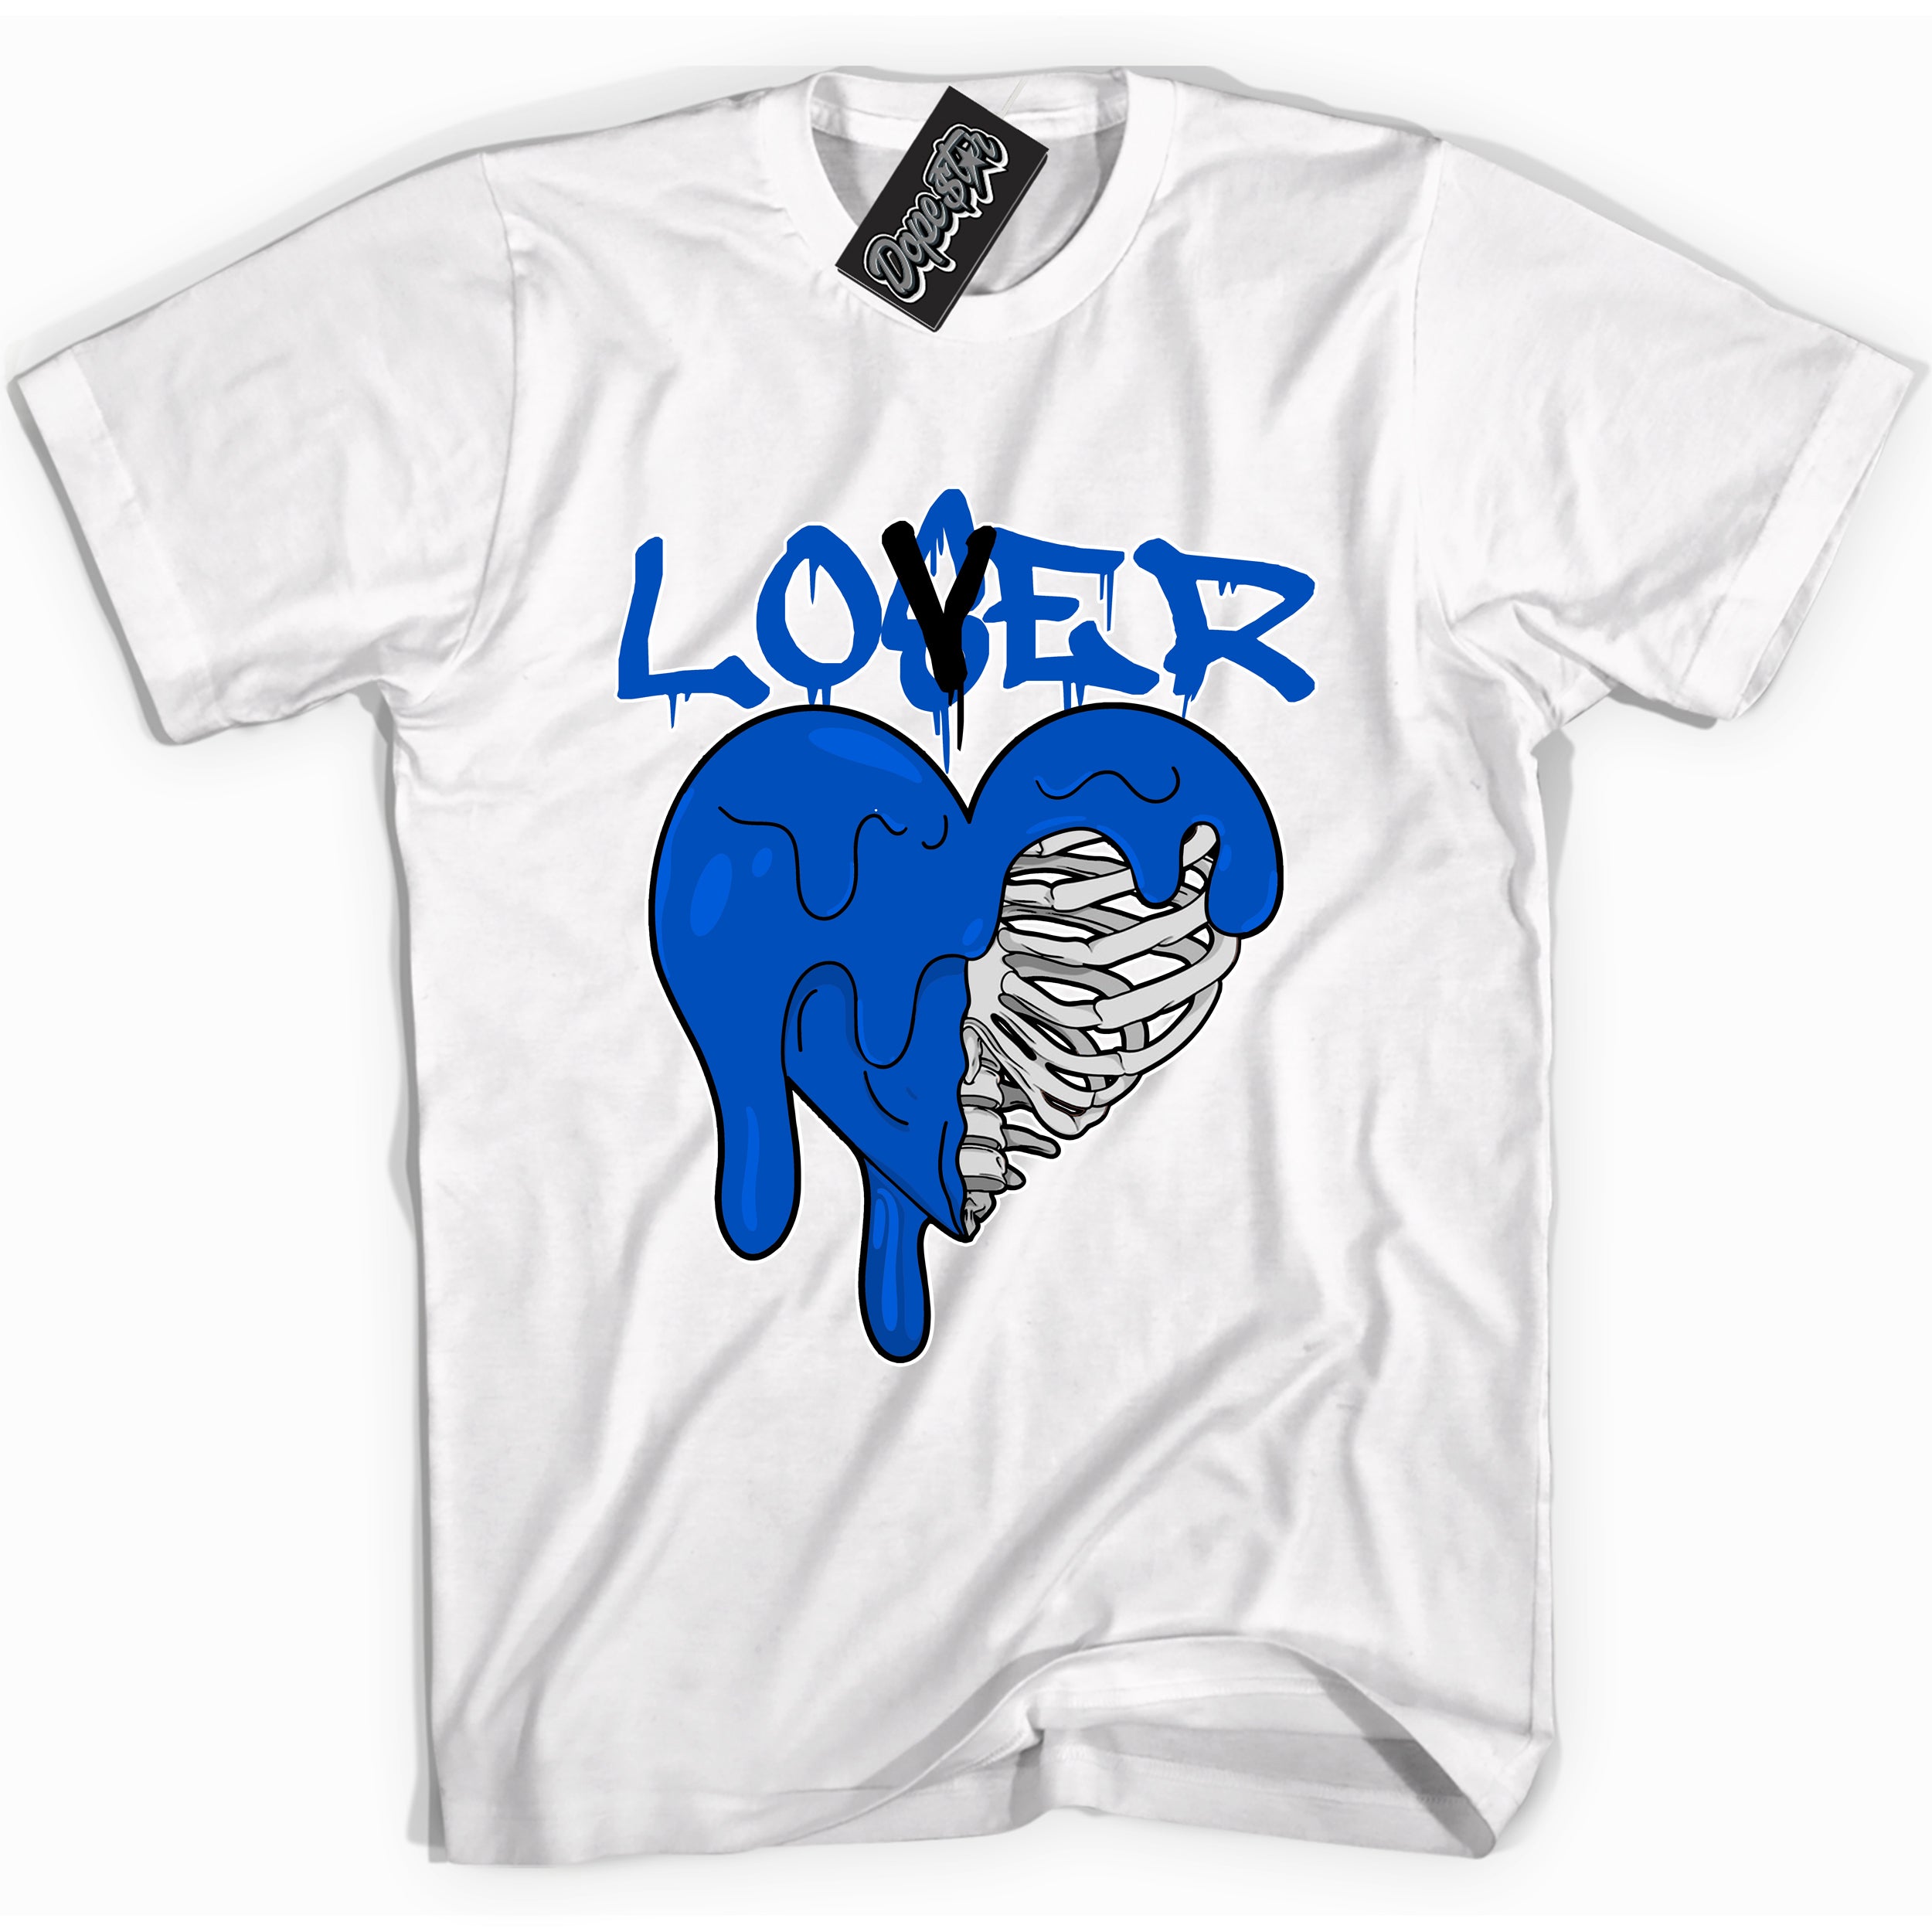 Cool White graphic tee with "Lover Loser Heart" design, that perfectly matches Royal Reimagined 1s sneakers 